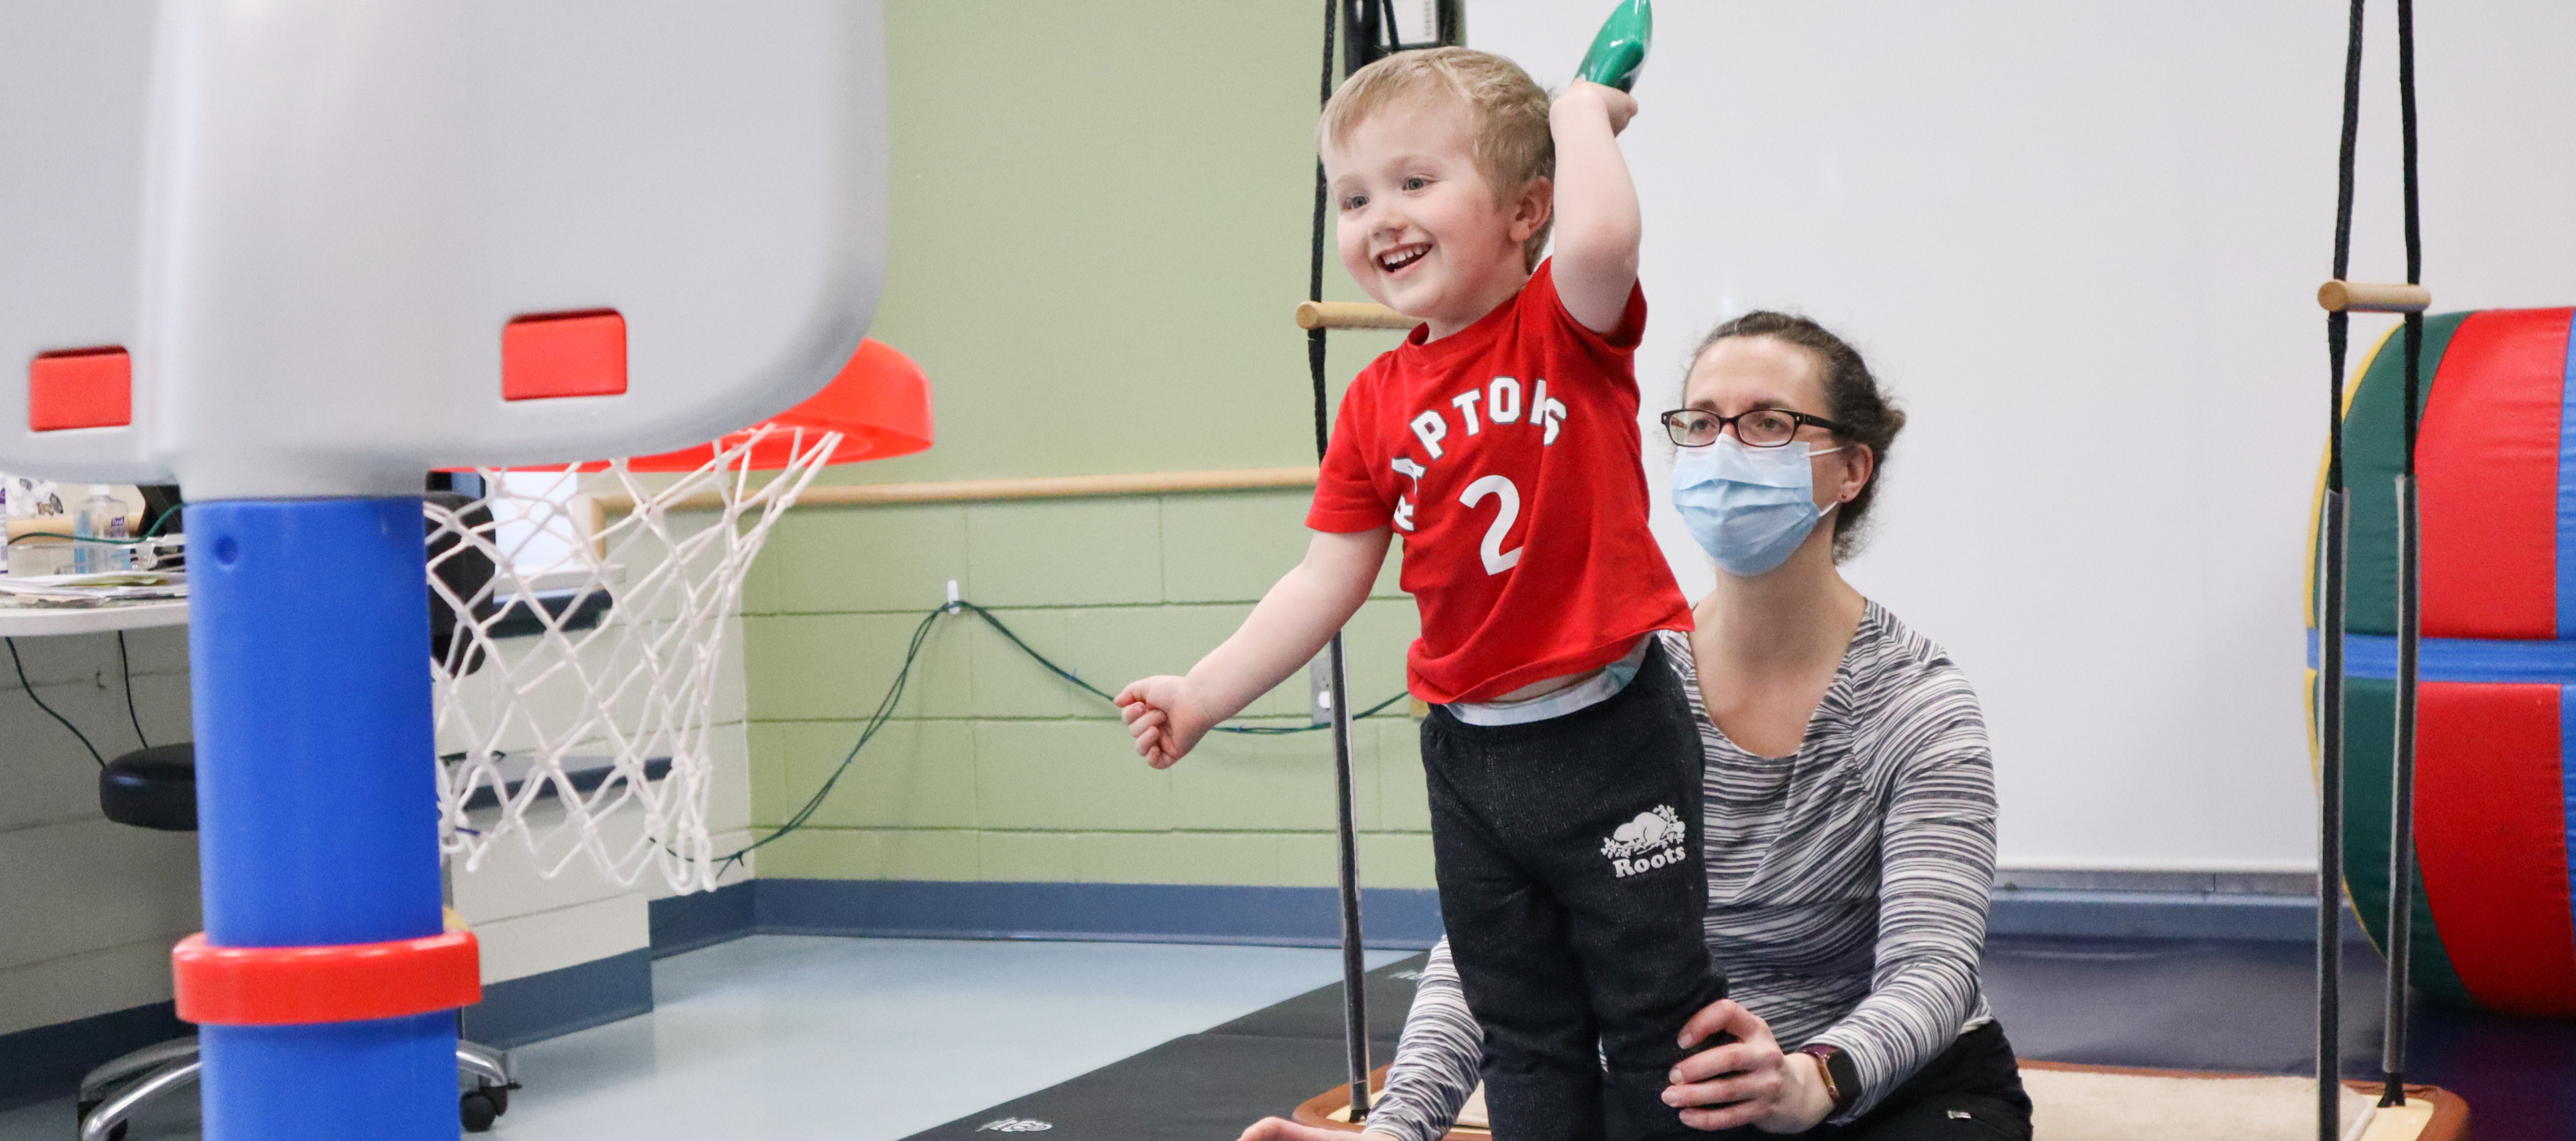 Occupational therapist stabilizes male child as he throws object into children’s basketball net at N